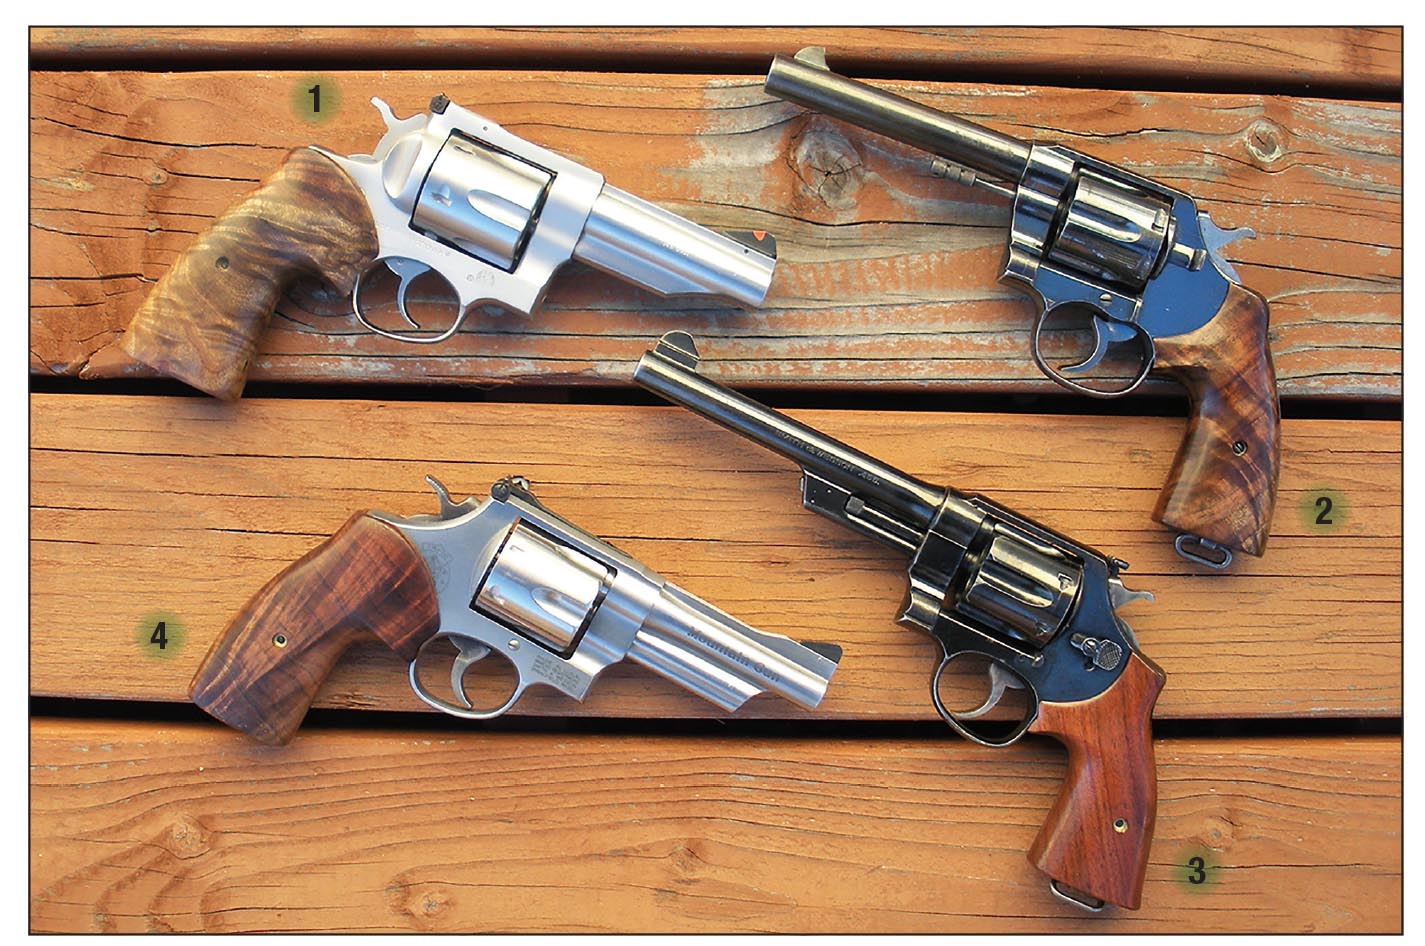 Double actions include a (1) Ruger Redhawk .4515-plus (chamber throat) and .451 (barrel groove); (2) Colt New Service “Navy” Model 1909, .457 and .454; (3) Smith & Wesson New Century, aka Triple Lock, .456 and .455 and (4) Smith & Wesson Model 25-6 Mountain Gun, .451-plus and .451.